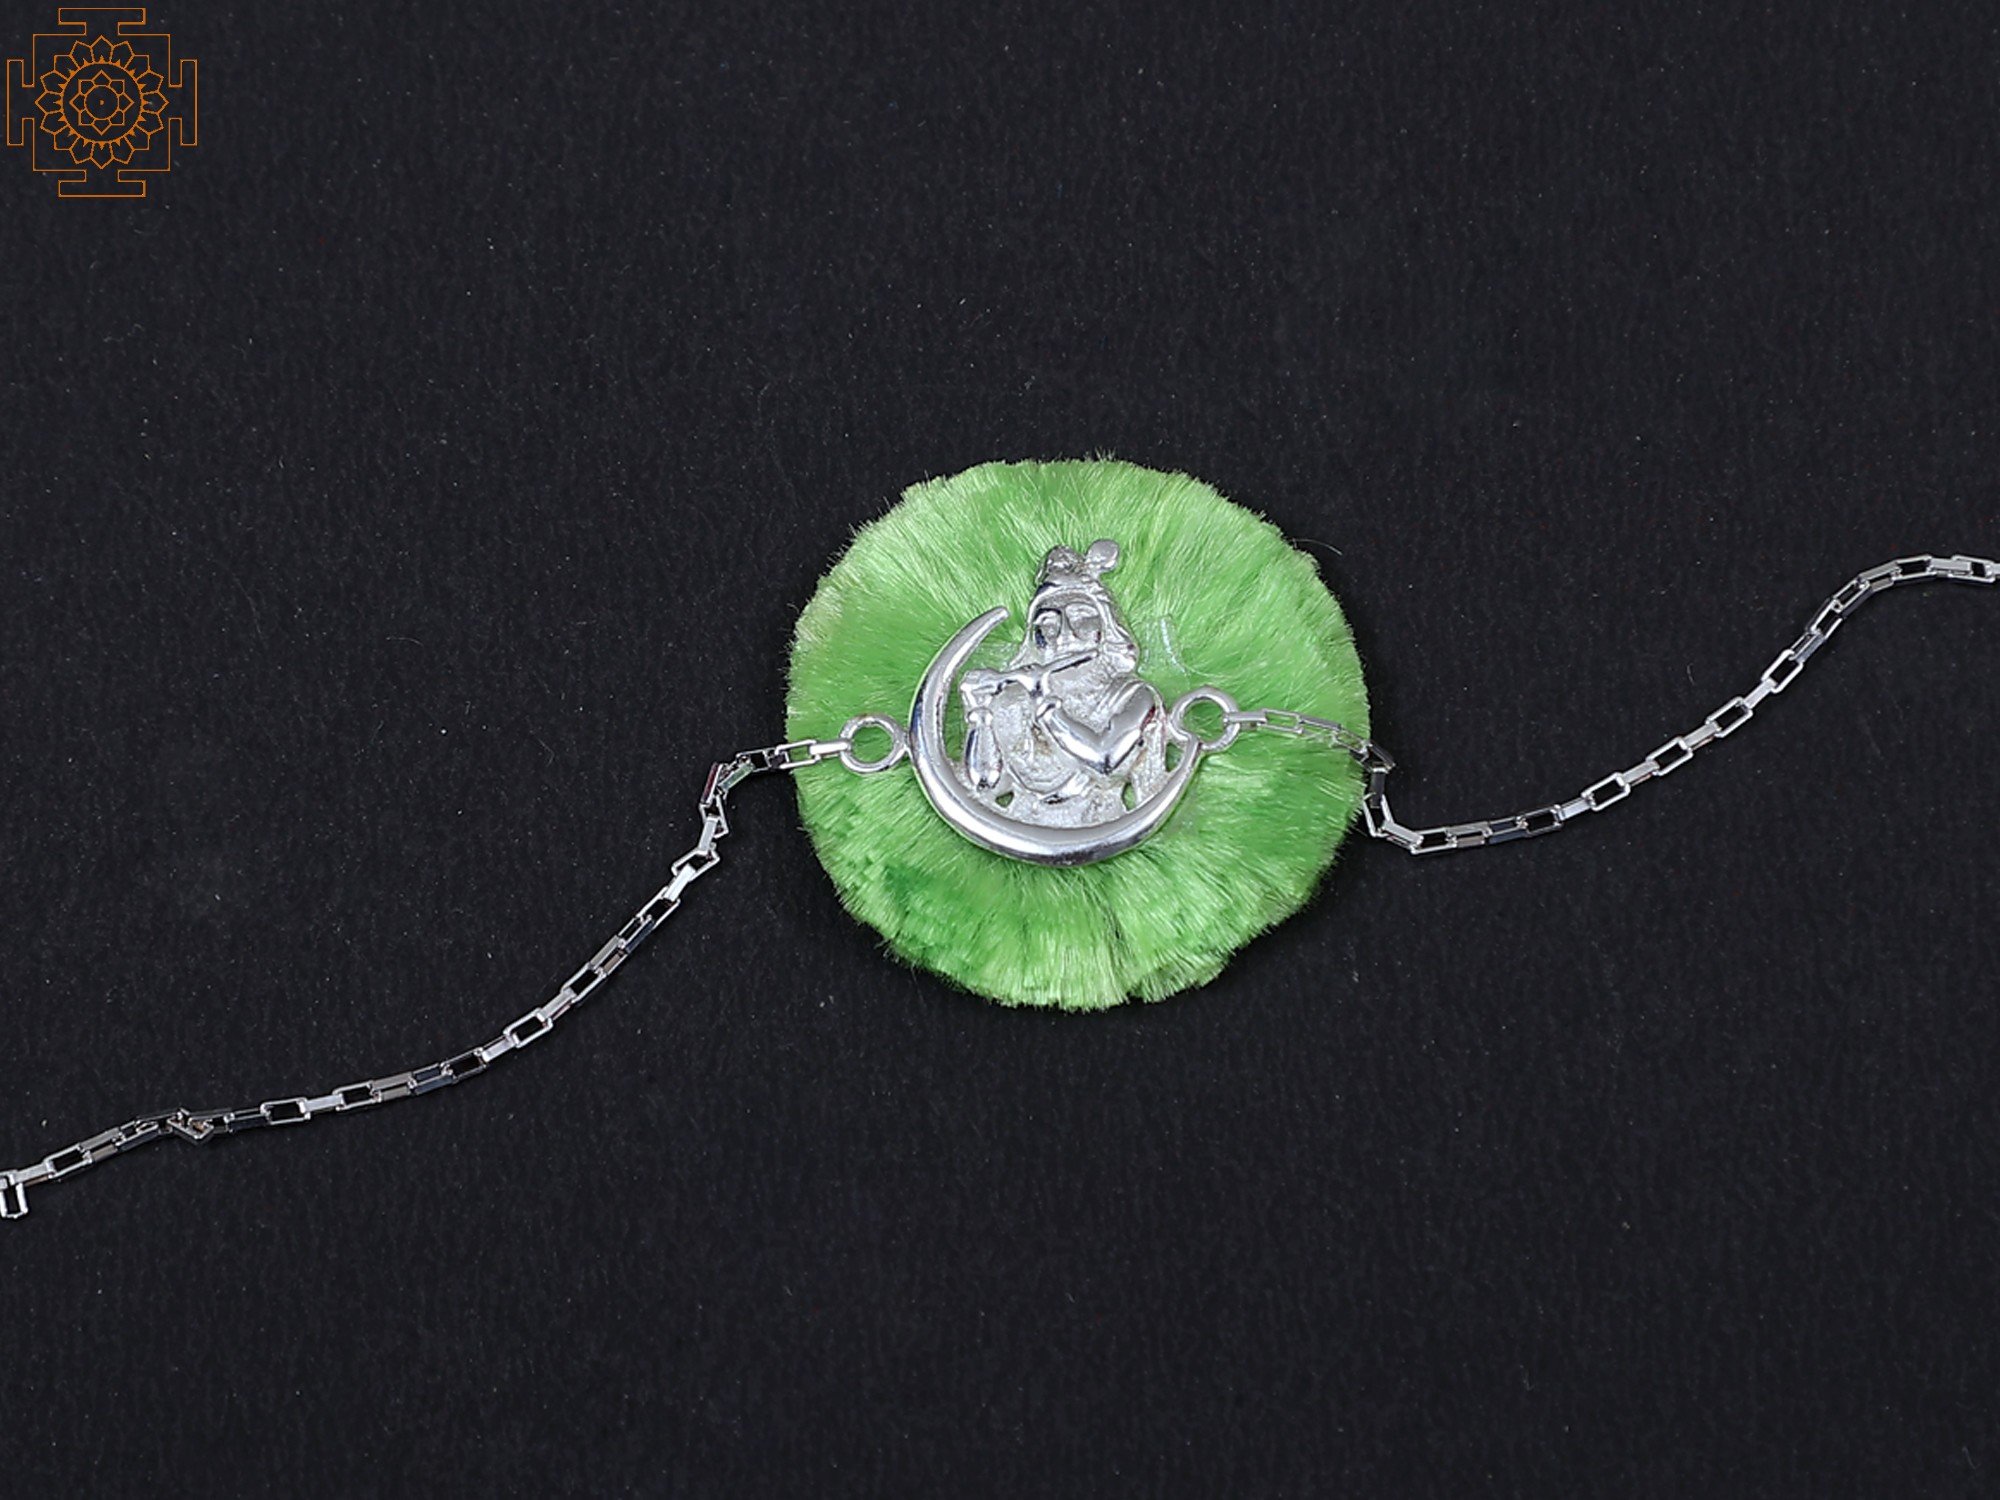 Buy 925 Sterling Silver Divine Lord Krishna Rakhi or Bracelet Best Gift for  Your Brother's for Special Personalized Gifing Rk239 Online in India - Etsy